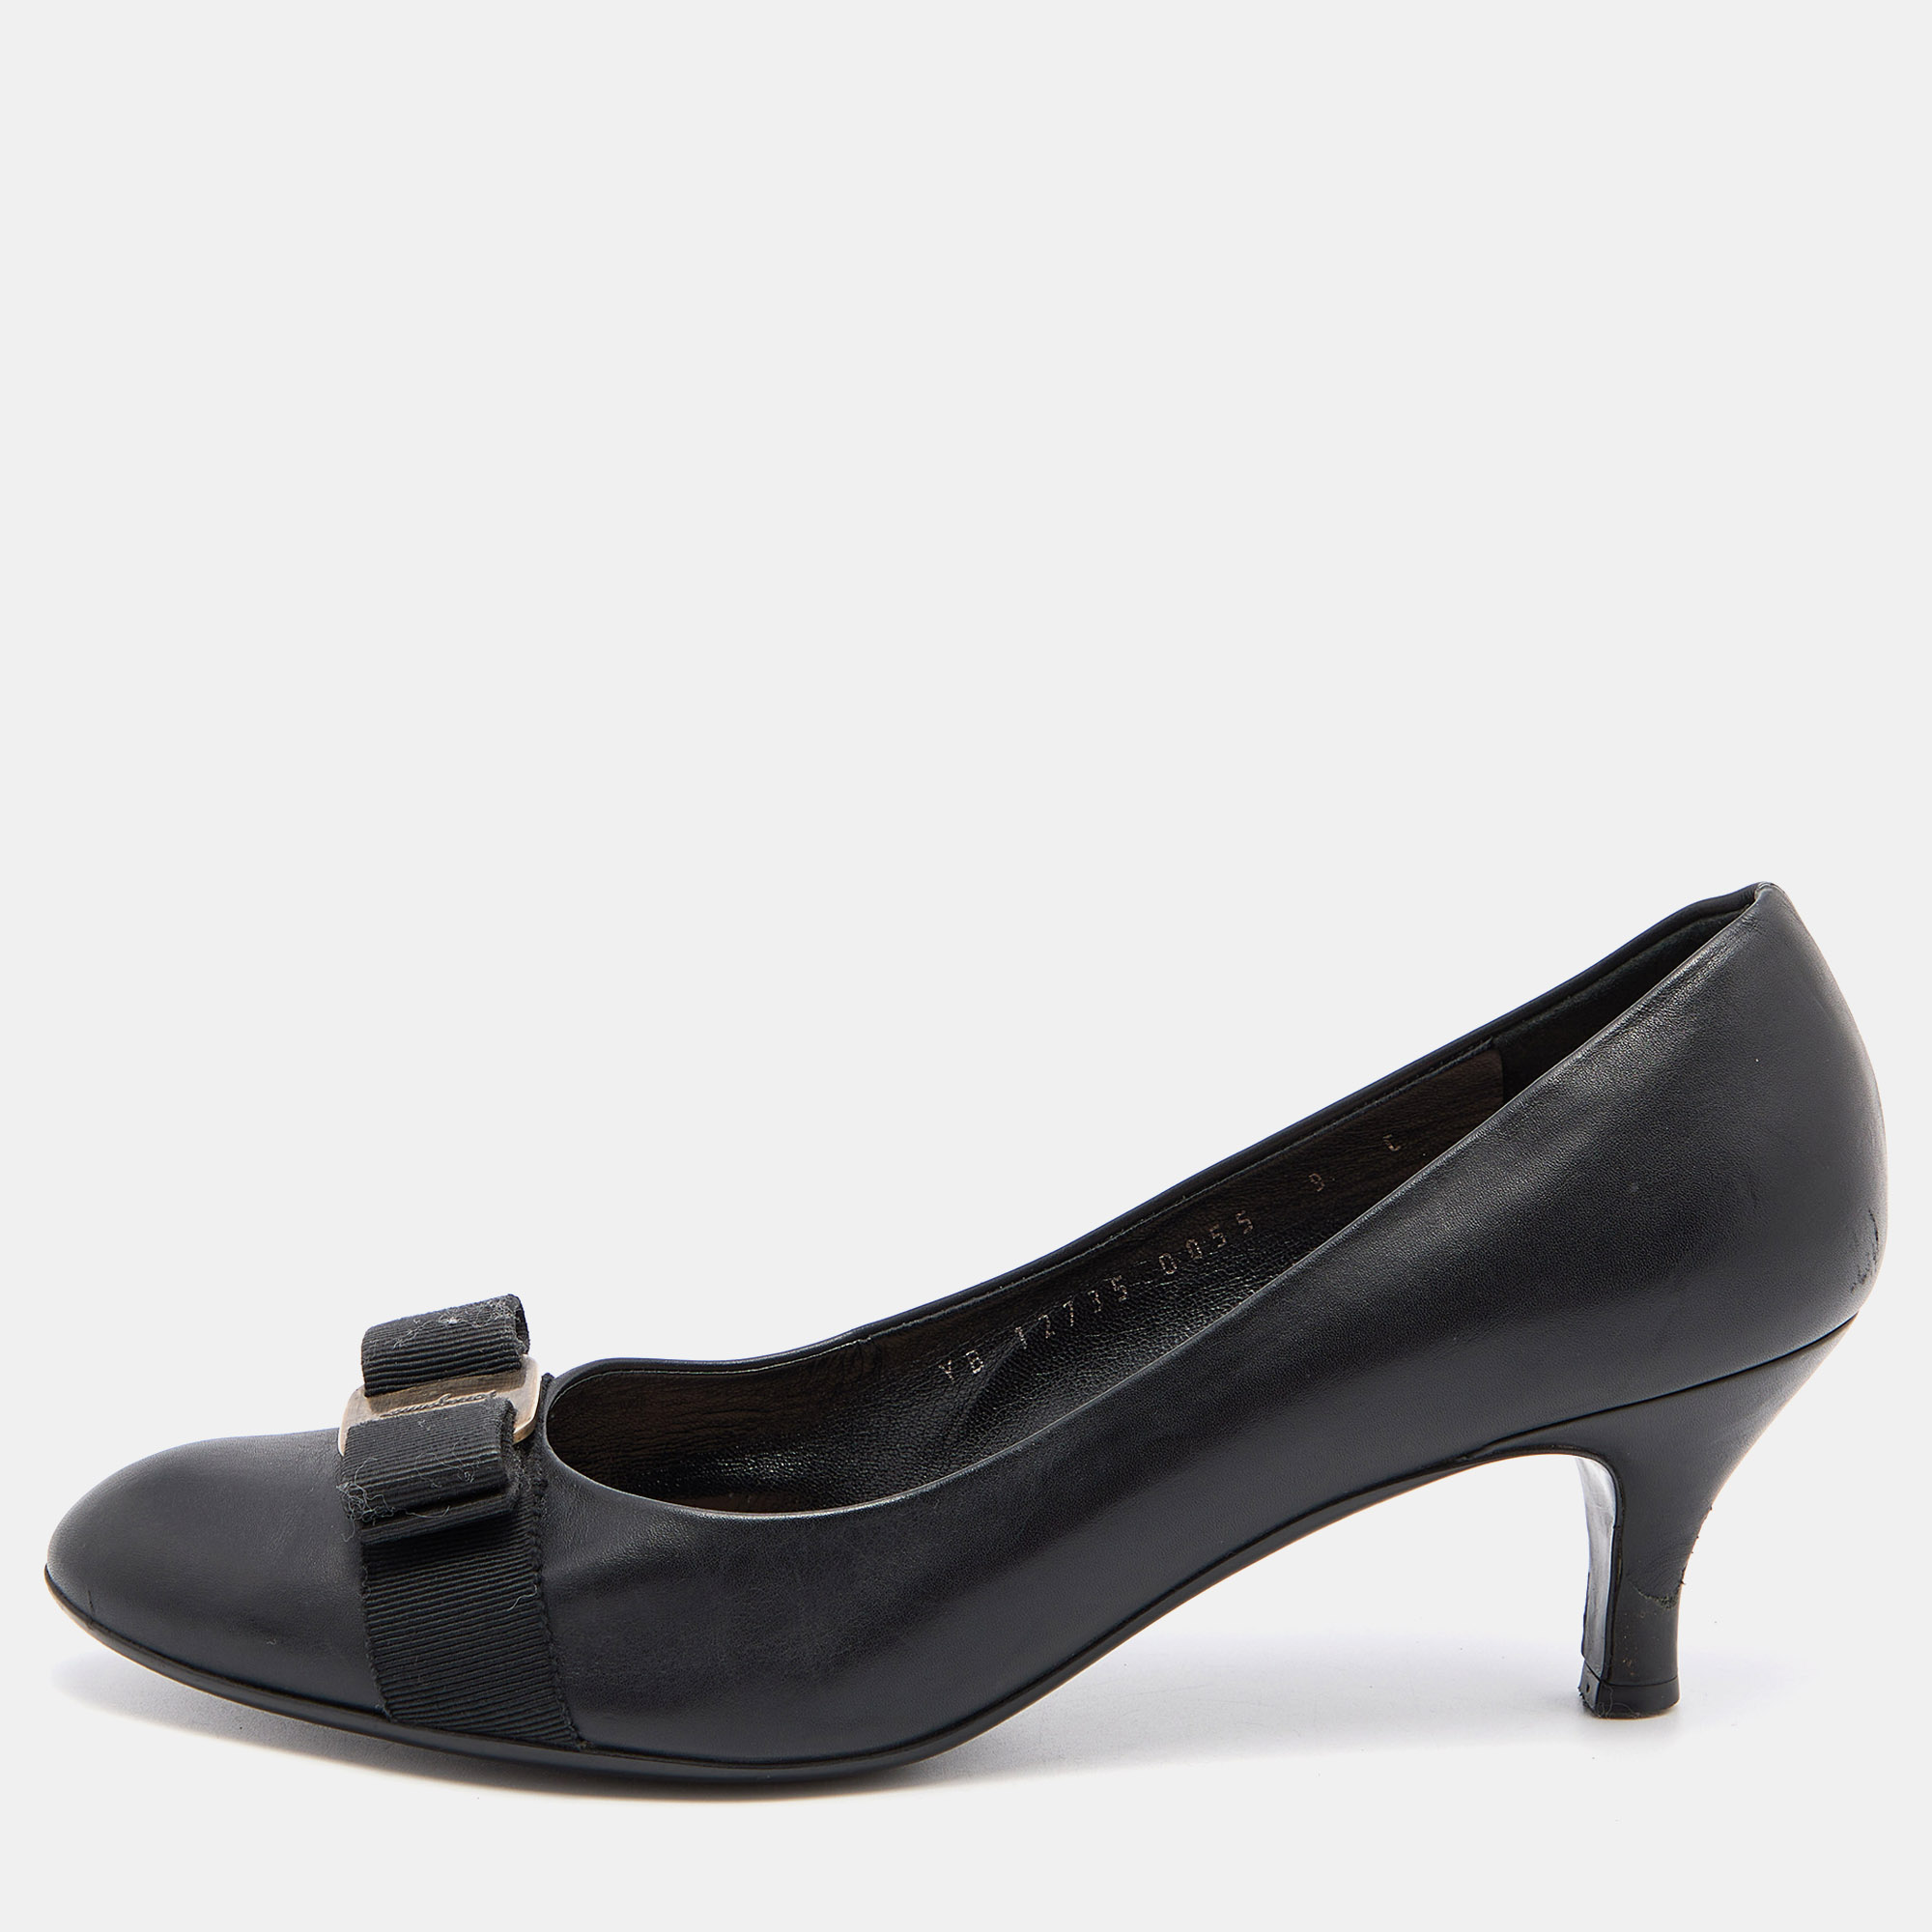 Pre-owned Ferragamo Black Leather Vara Bow Pumps Size 39.5